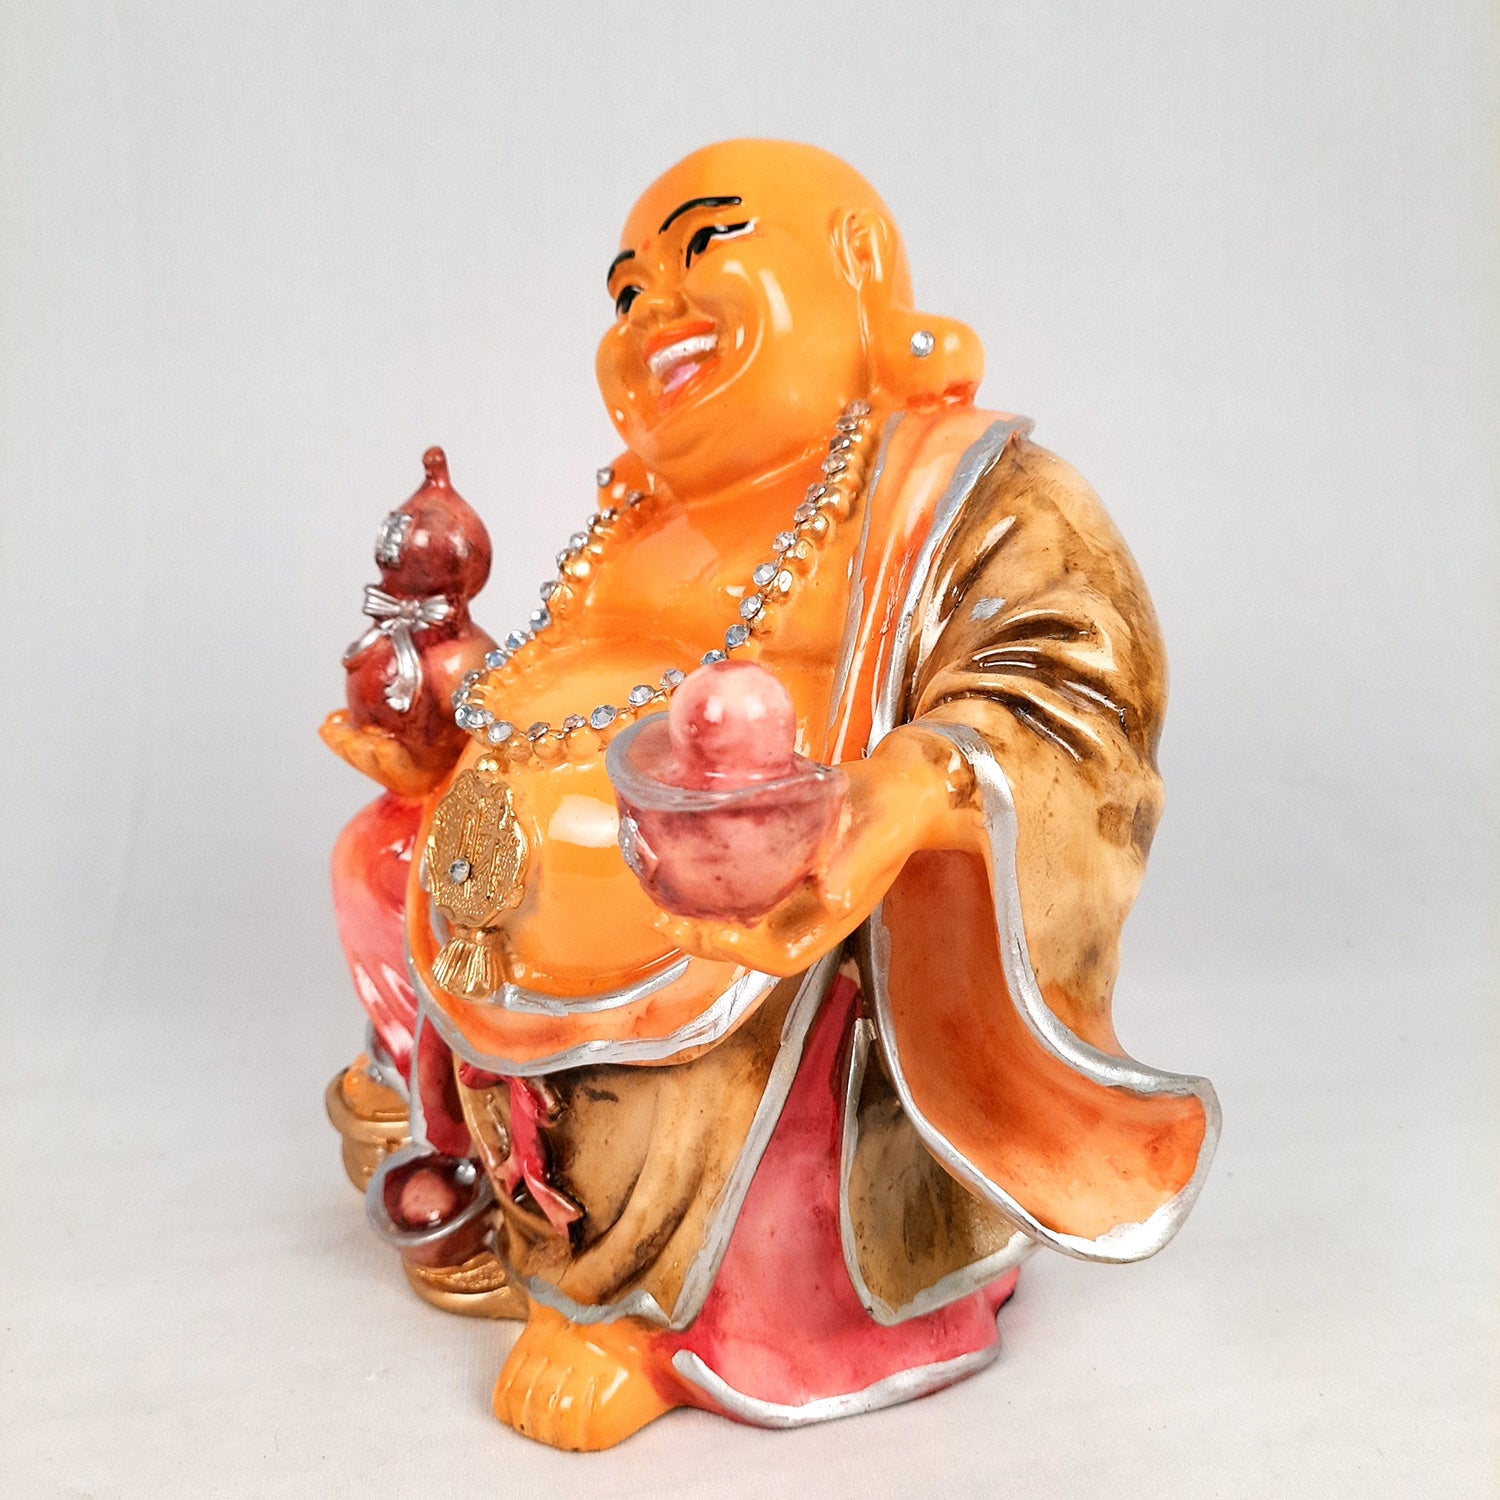 Amazon.com: eSplanade Resin Laughing Buddha Statue | Feng Shui Figurine  Showpiece for Living Room Home Office Decoration and Gift -16